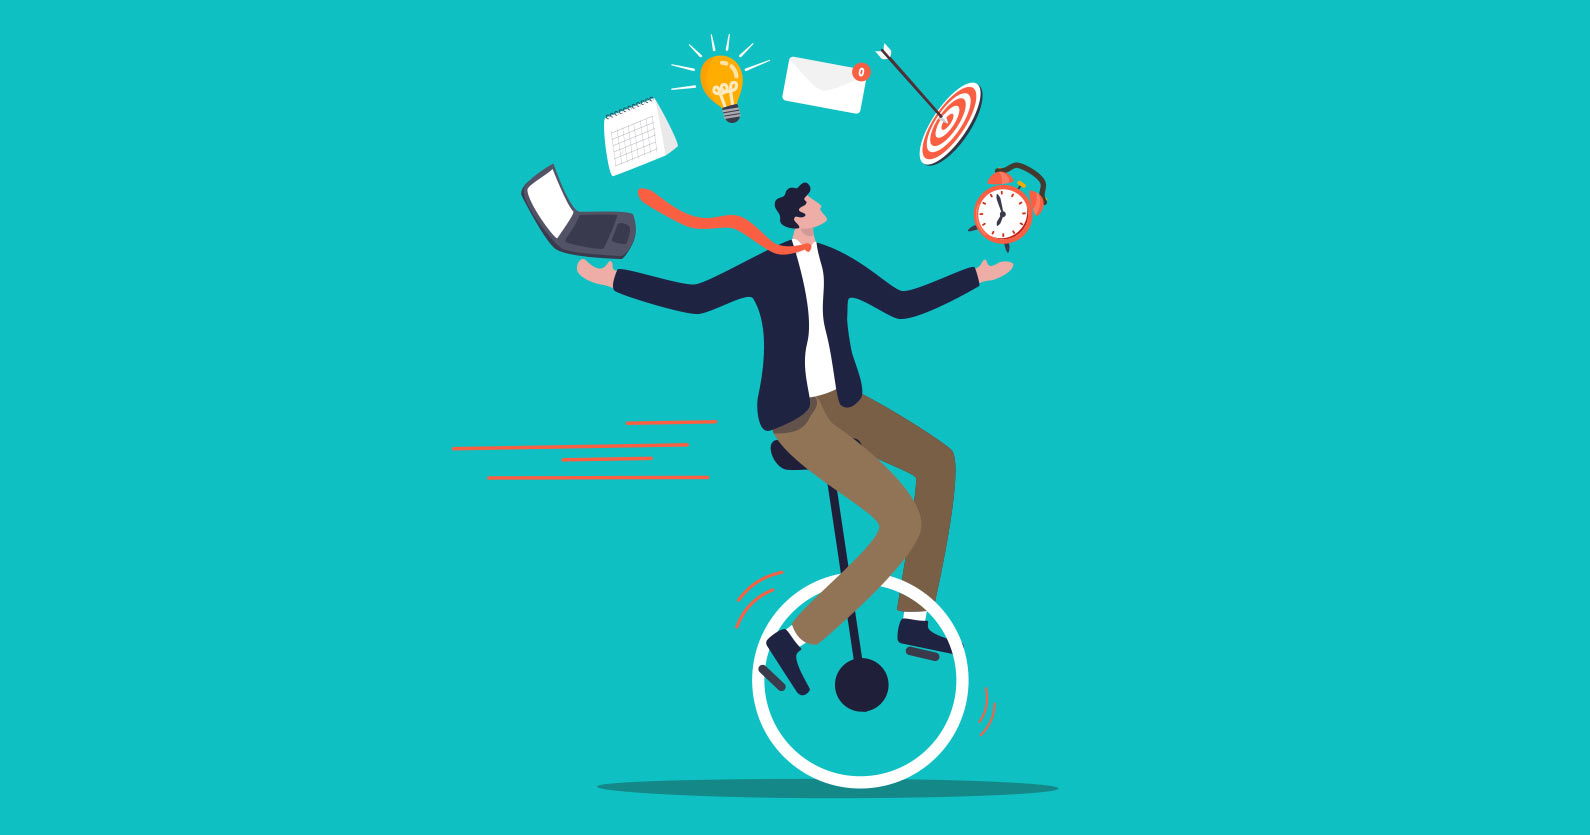 Illustration of a man on a unicycle juggling tasks